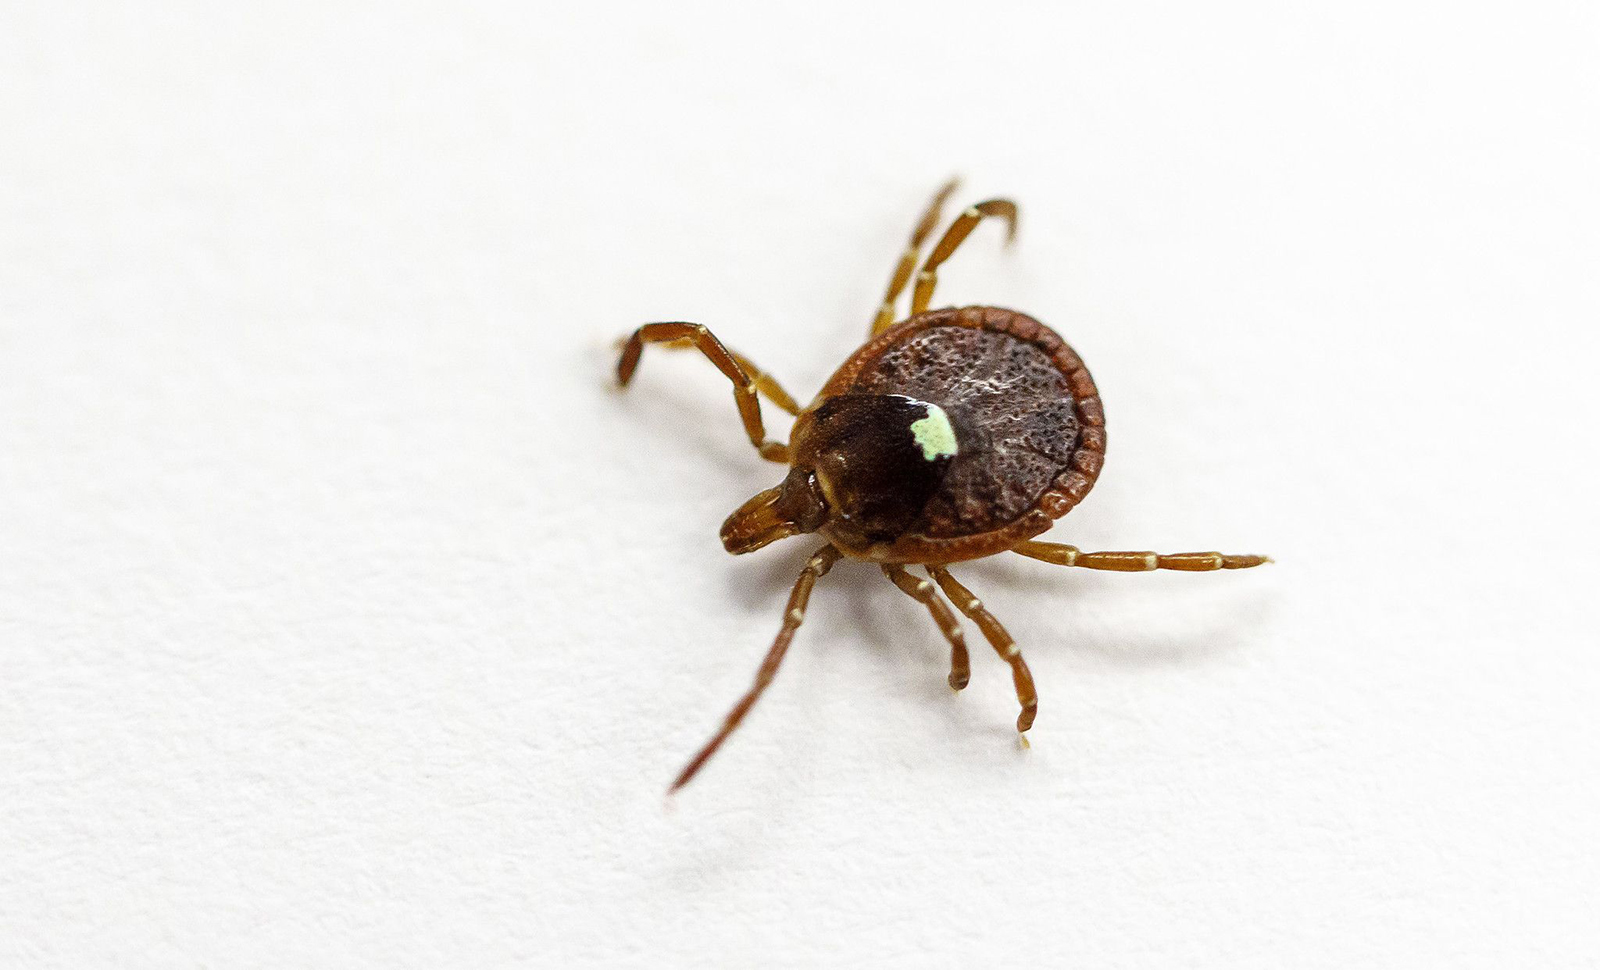 Close-up photograph of a brown lone star tick with a whitish spot on it’s back and four legs. Photograph taken in a lab in Morrill Hall at the University of Illinois in 2017.